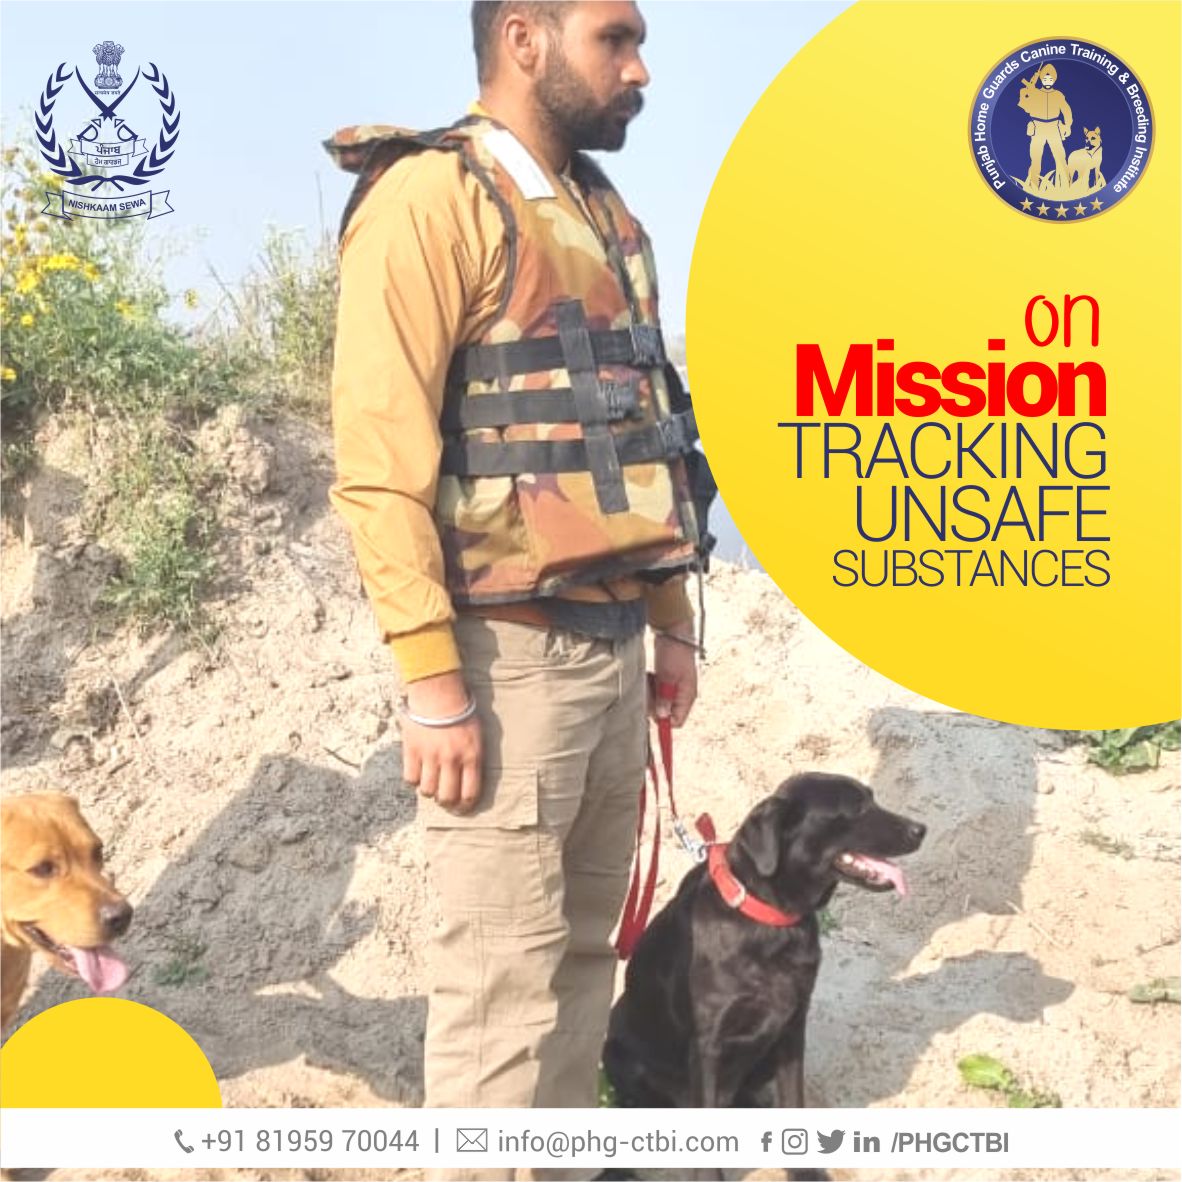 Our detection canines are high-performance with strong months-long training and skilled handler. #PHGCTBI is on a mission of tracking unsafe substances in the State.
#canine #doghandler #k9dogs #k9unit #k9trainer #k9handler #trackingdog #punjab #narcoticdetection #snifferdogs